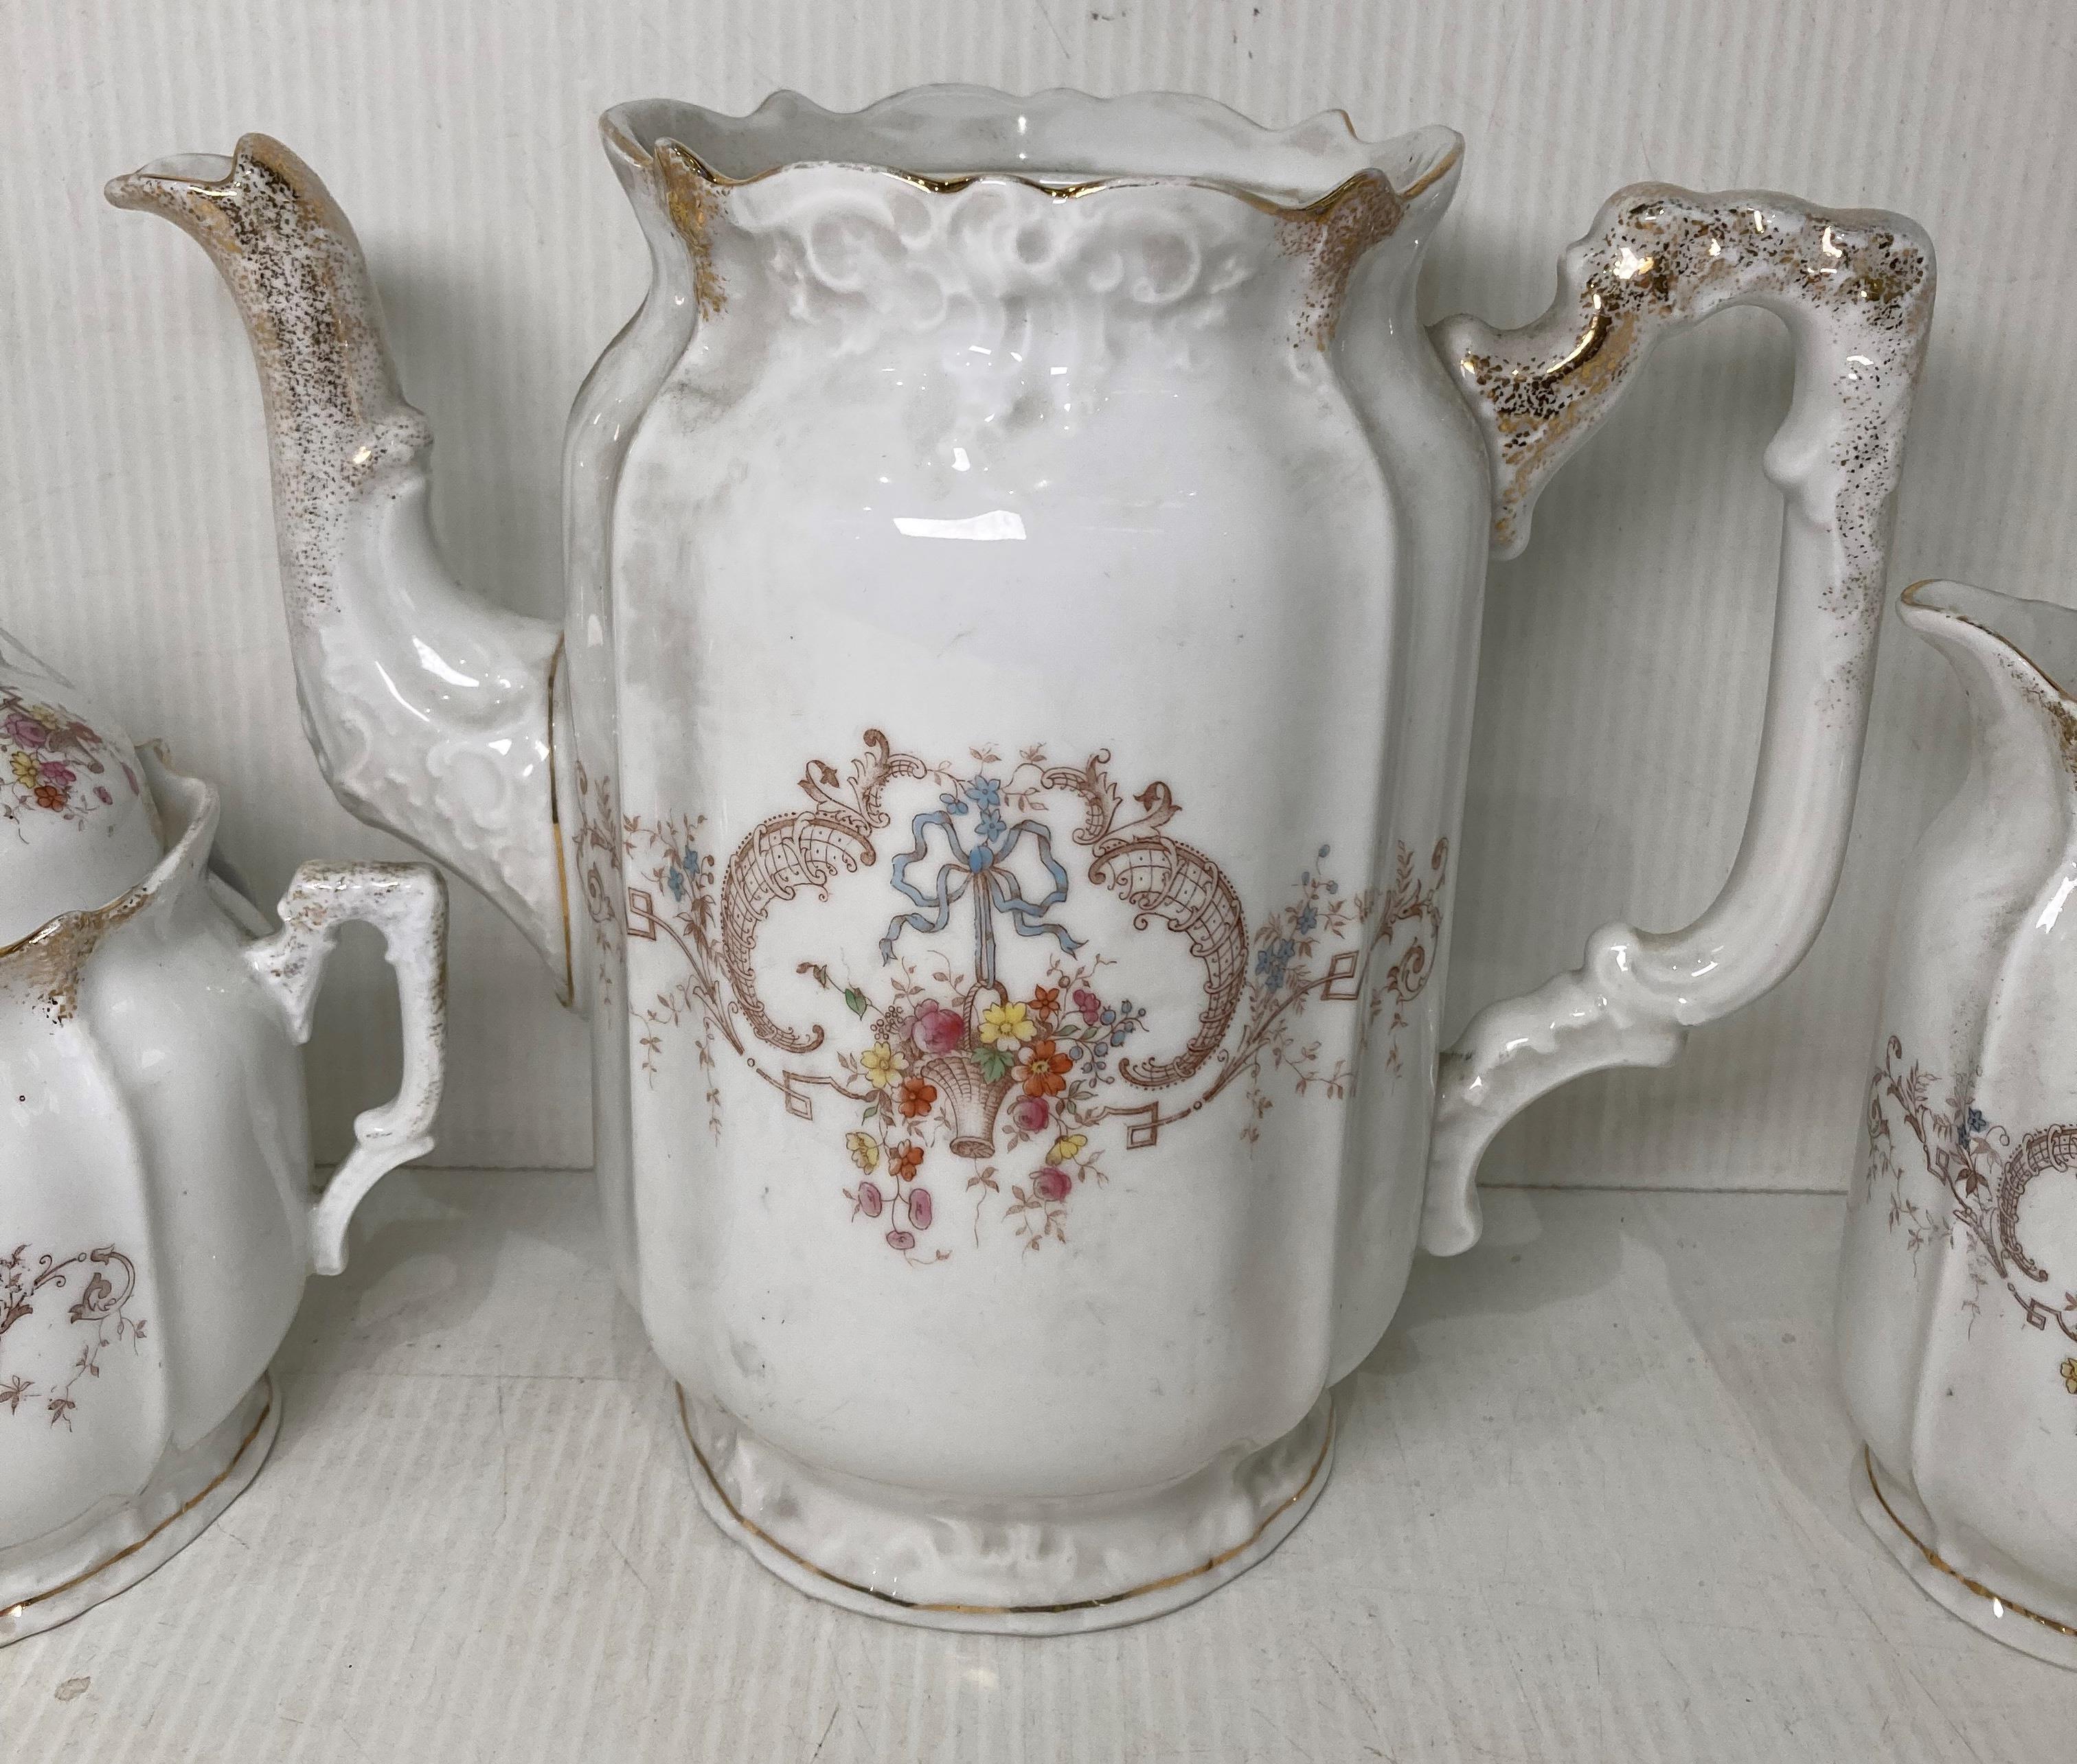 A late 19th Century Hermann Ohme three-piece tea service including sugar bowl (with lid), milk jug, - Image 3 of 5